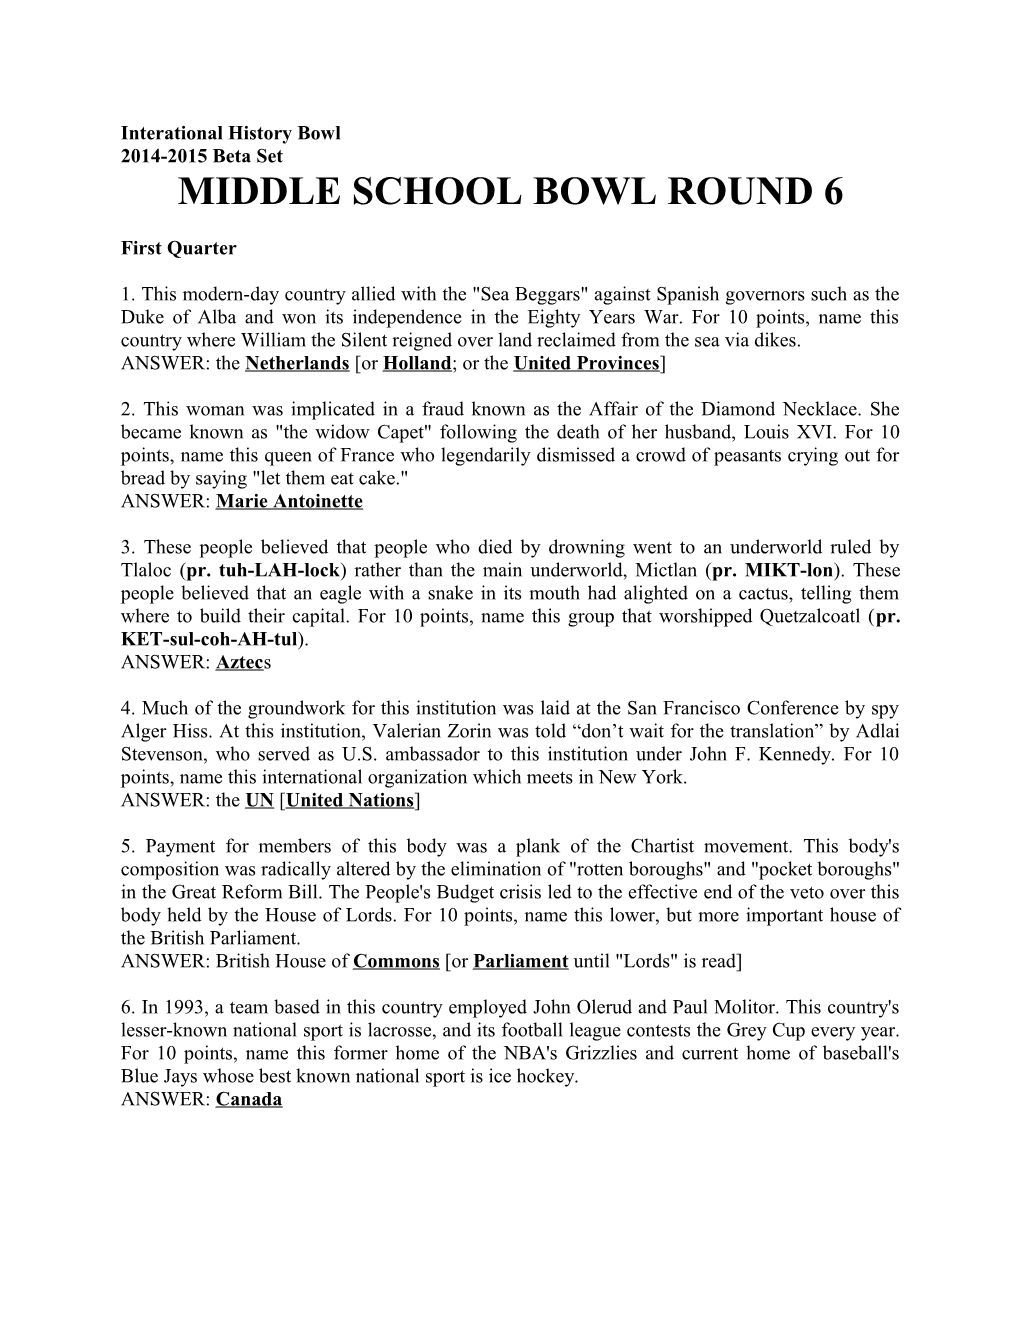 Middle School Bowl Round 6